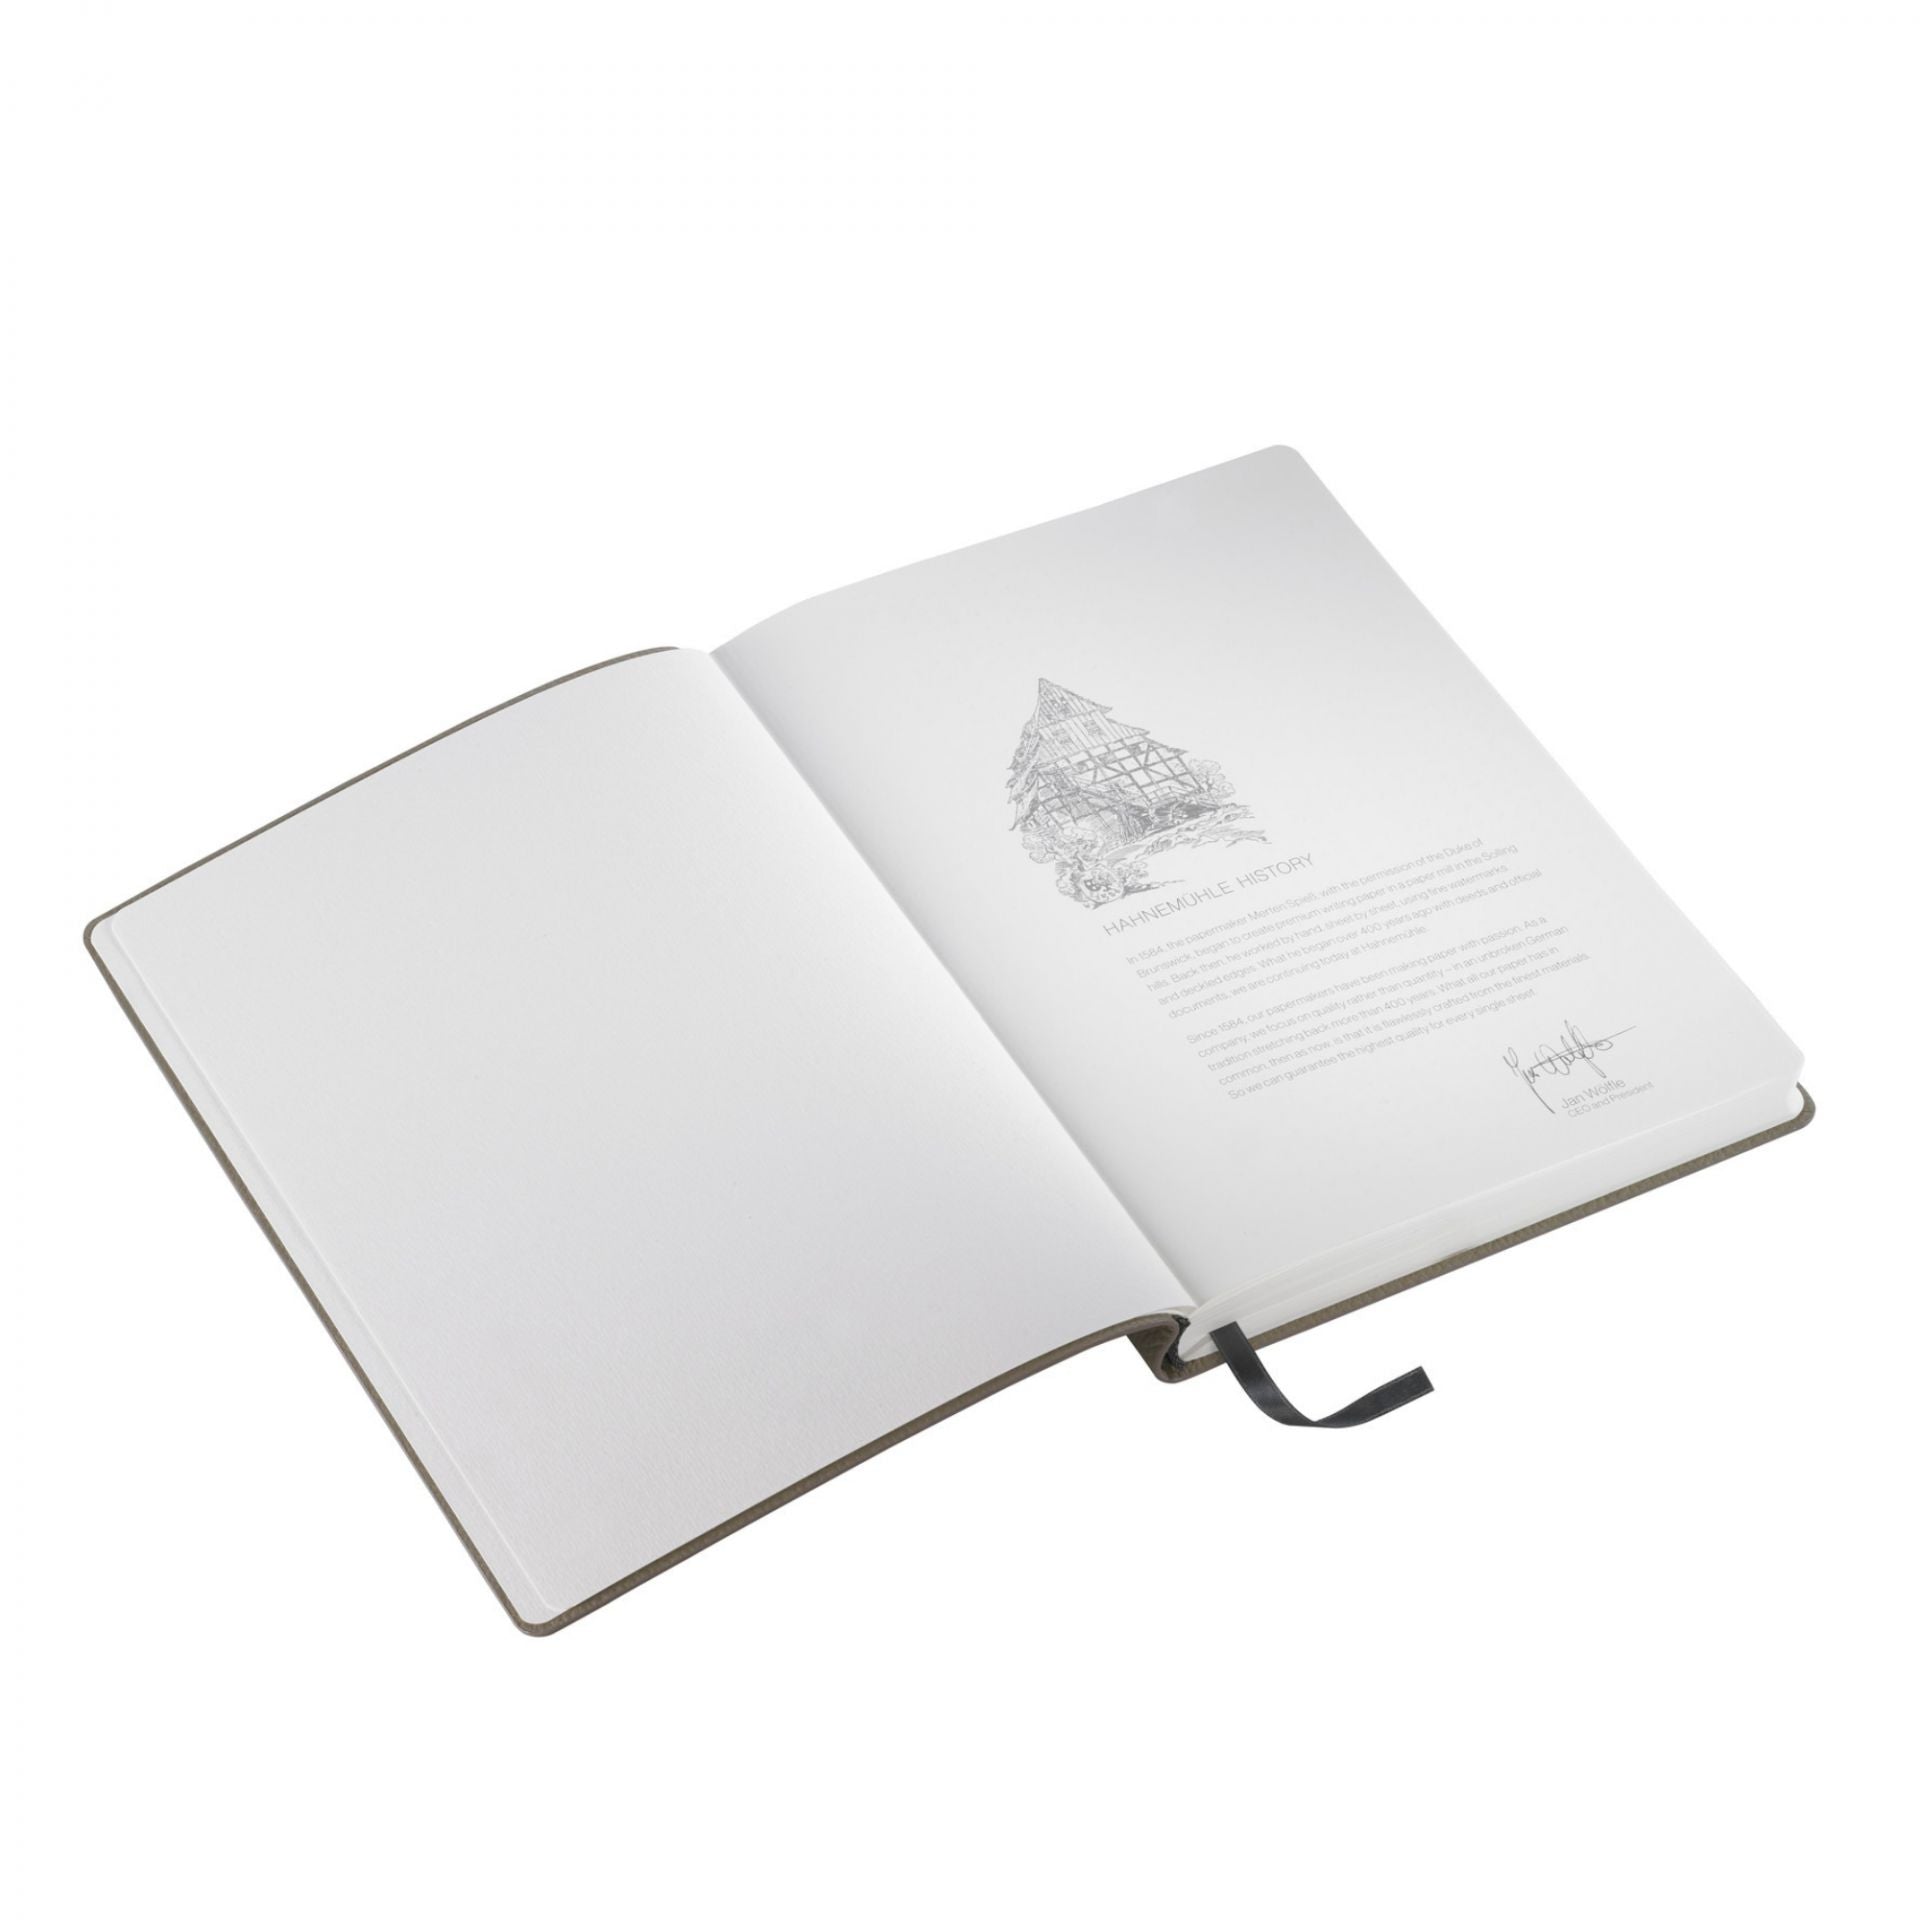 Hahnemühle Iconic Notebook